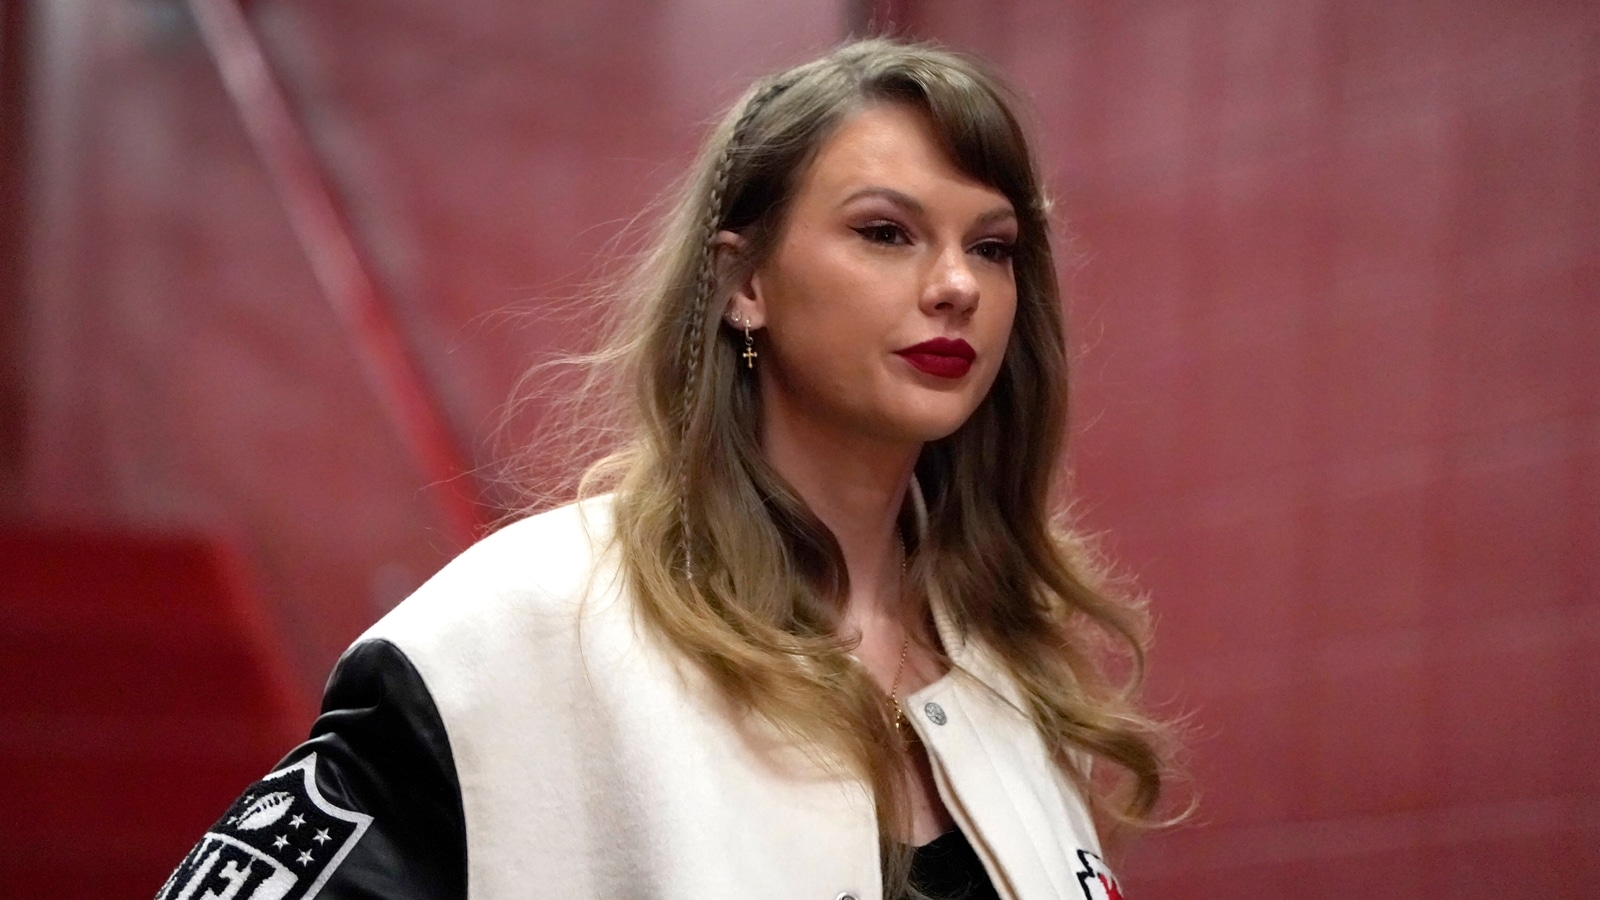 AI horror: Outrage over deepfake images of singer Taylor Swift